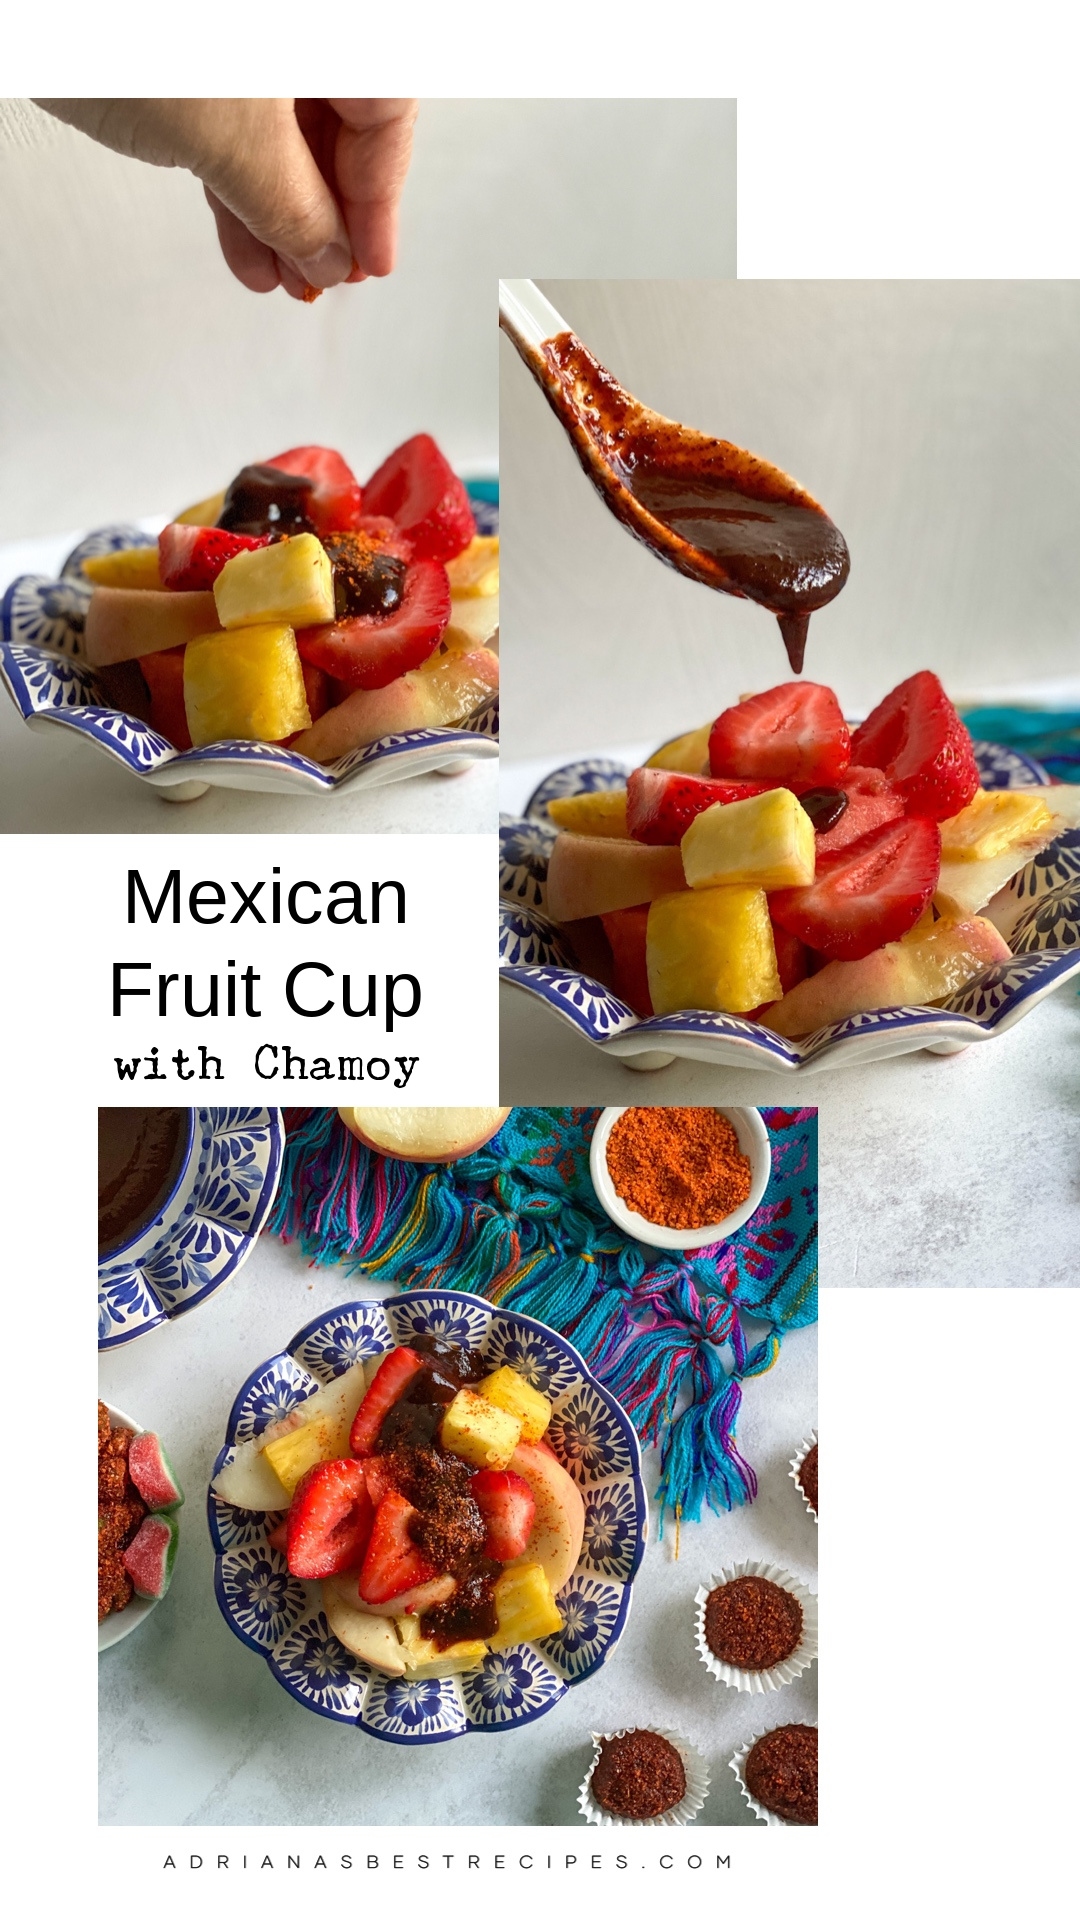 Classic Mexican Fruit Cup with umeboshi sour apricot flavor notes